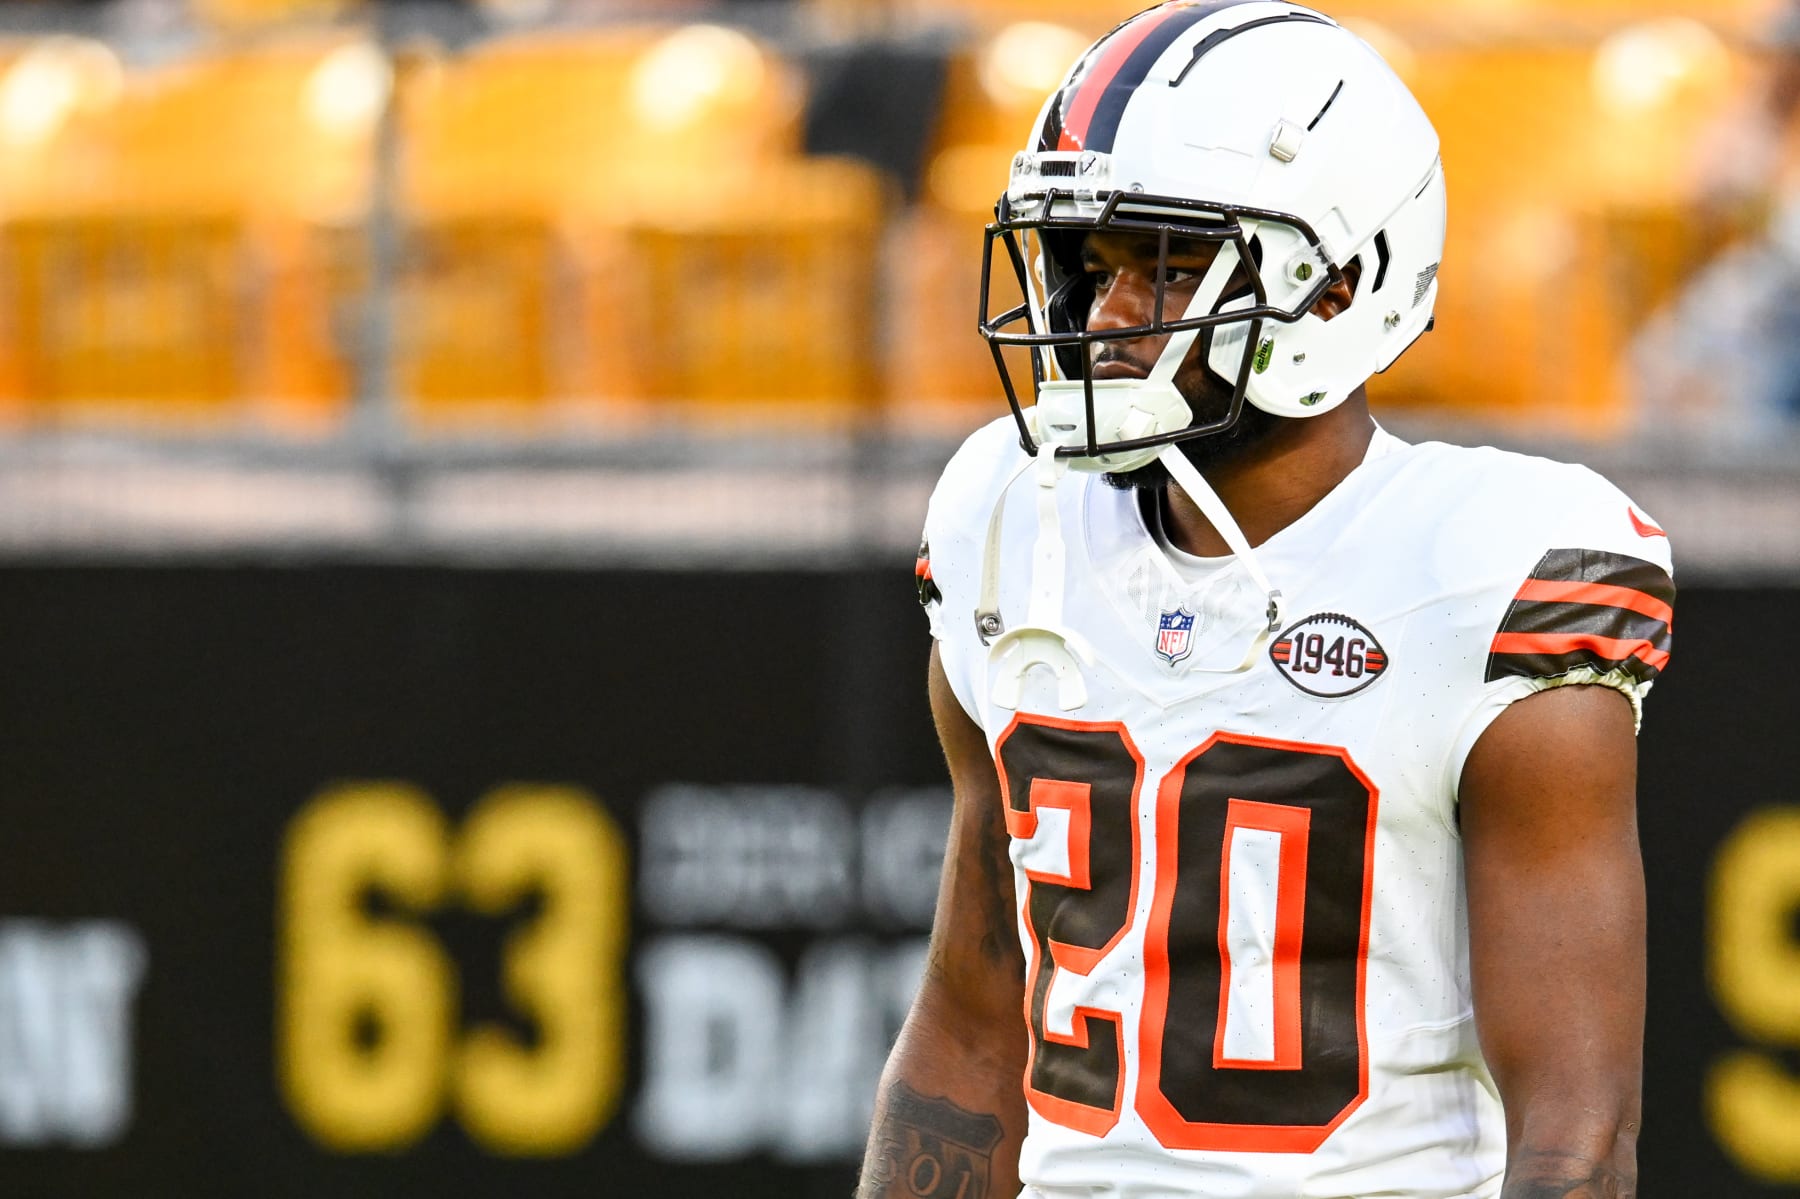 Photo: Browns Debut New Helmet with All-White Uniforms vs